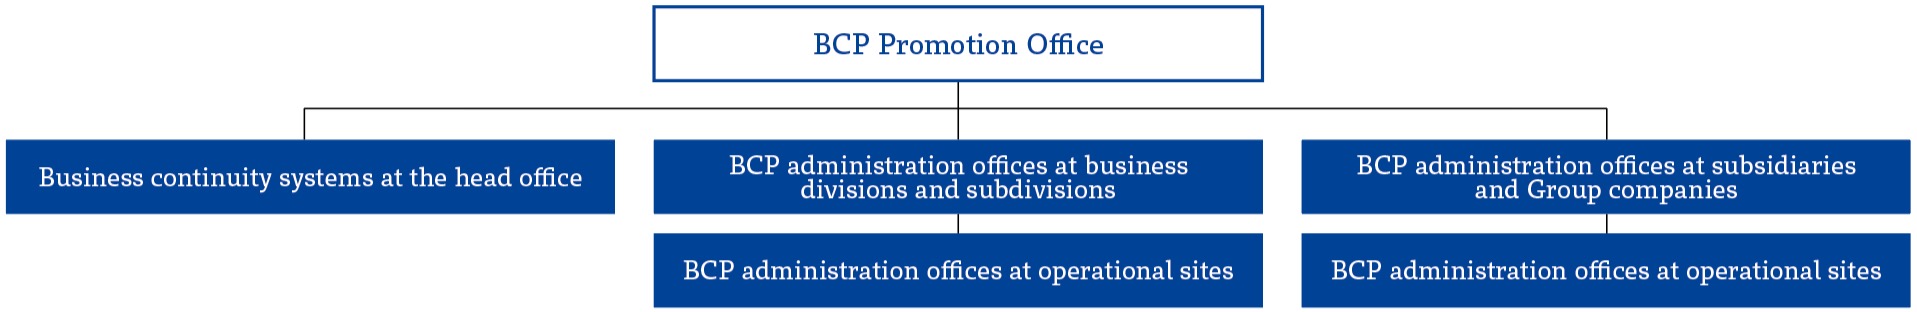 TOPPAN Group BCP Promotion Structure